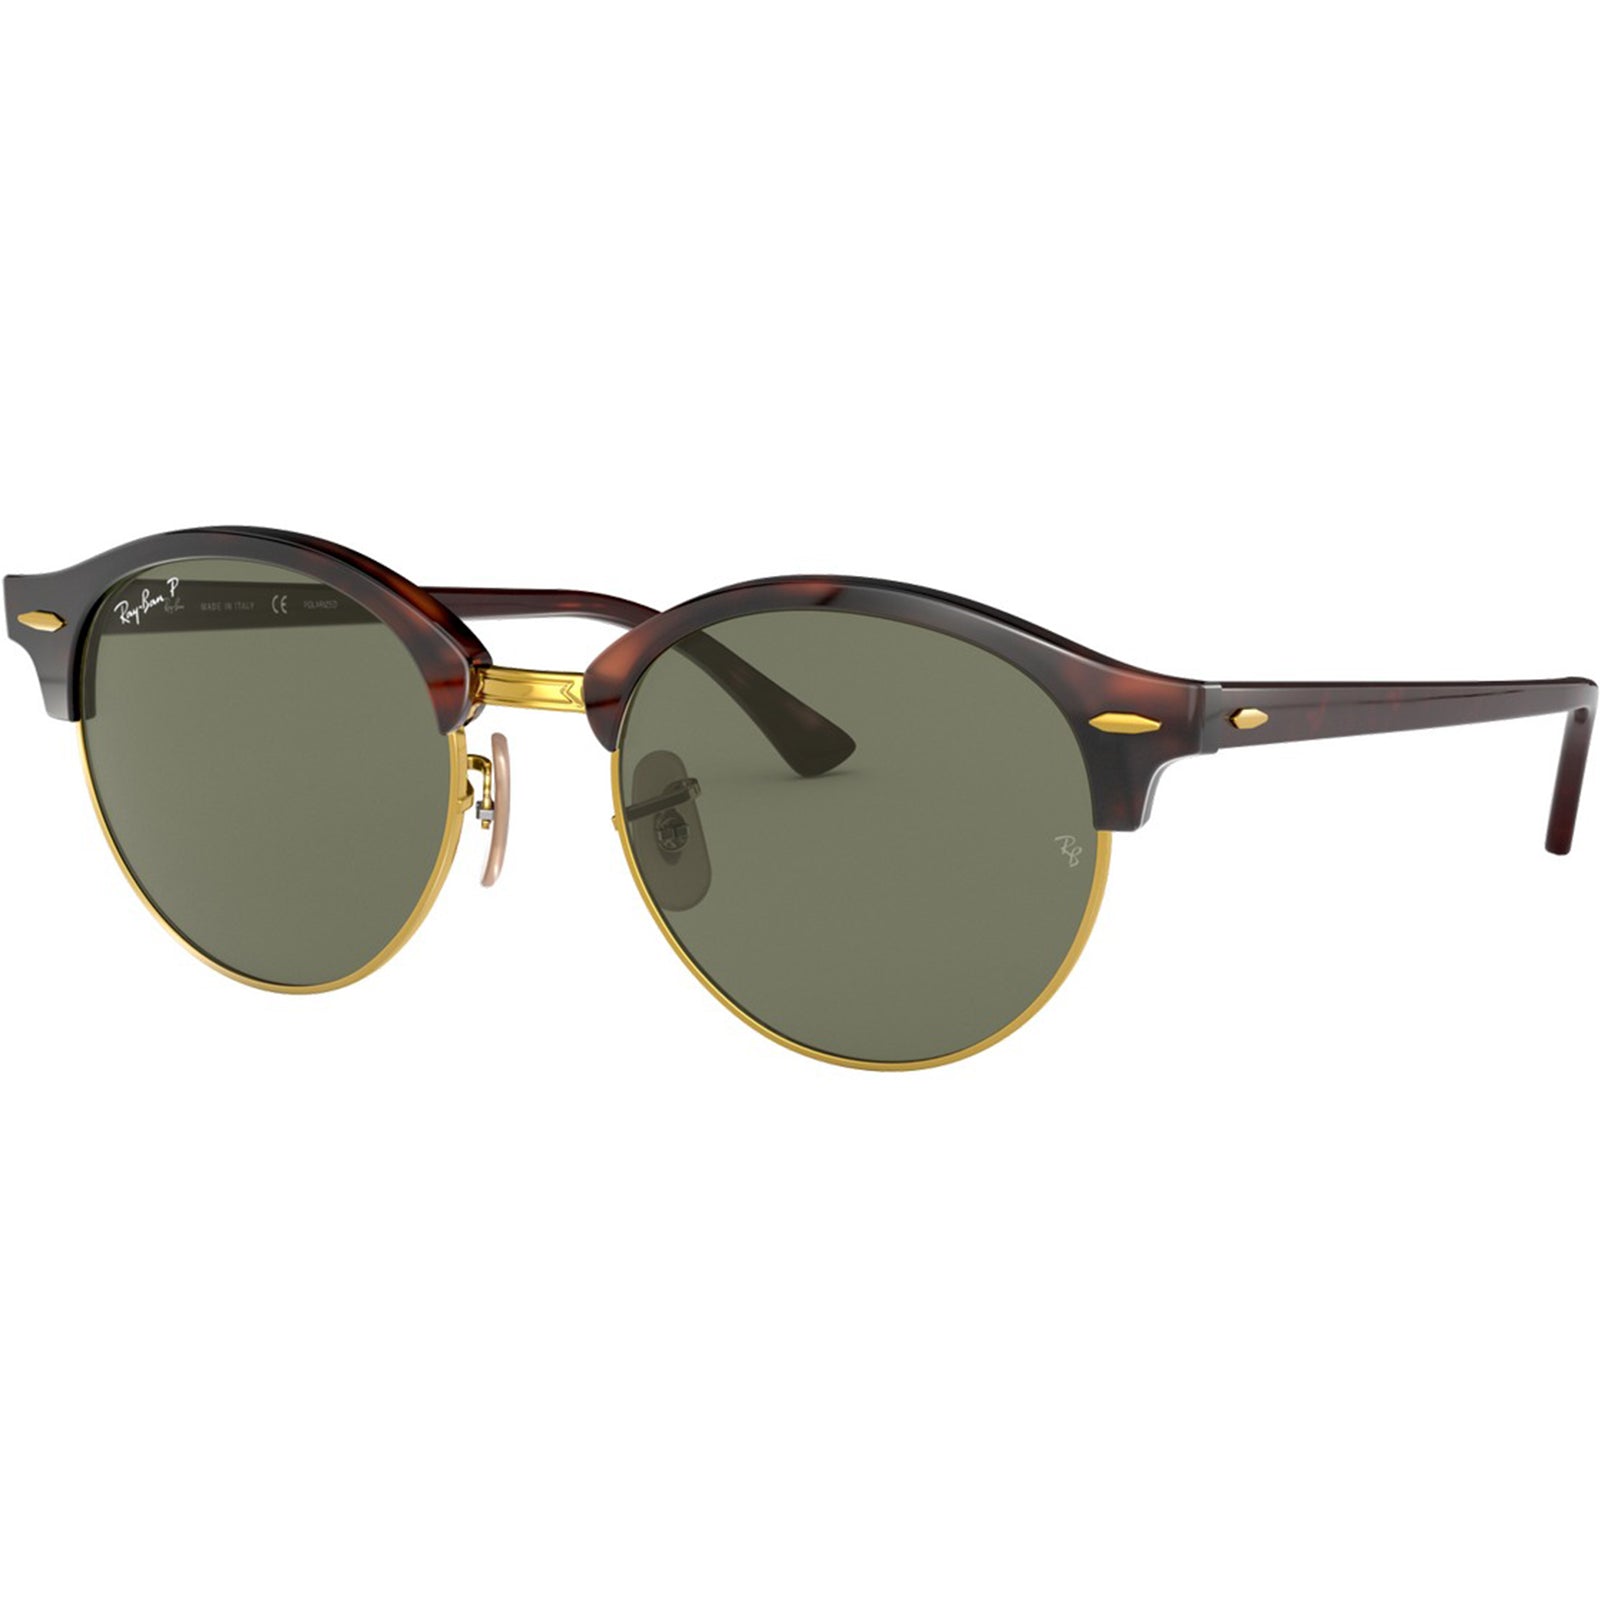 Ray-Ban Clubround Adult Lifestyle Polarized Sunglasses-0RB4246